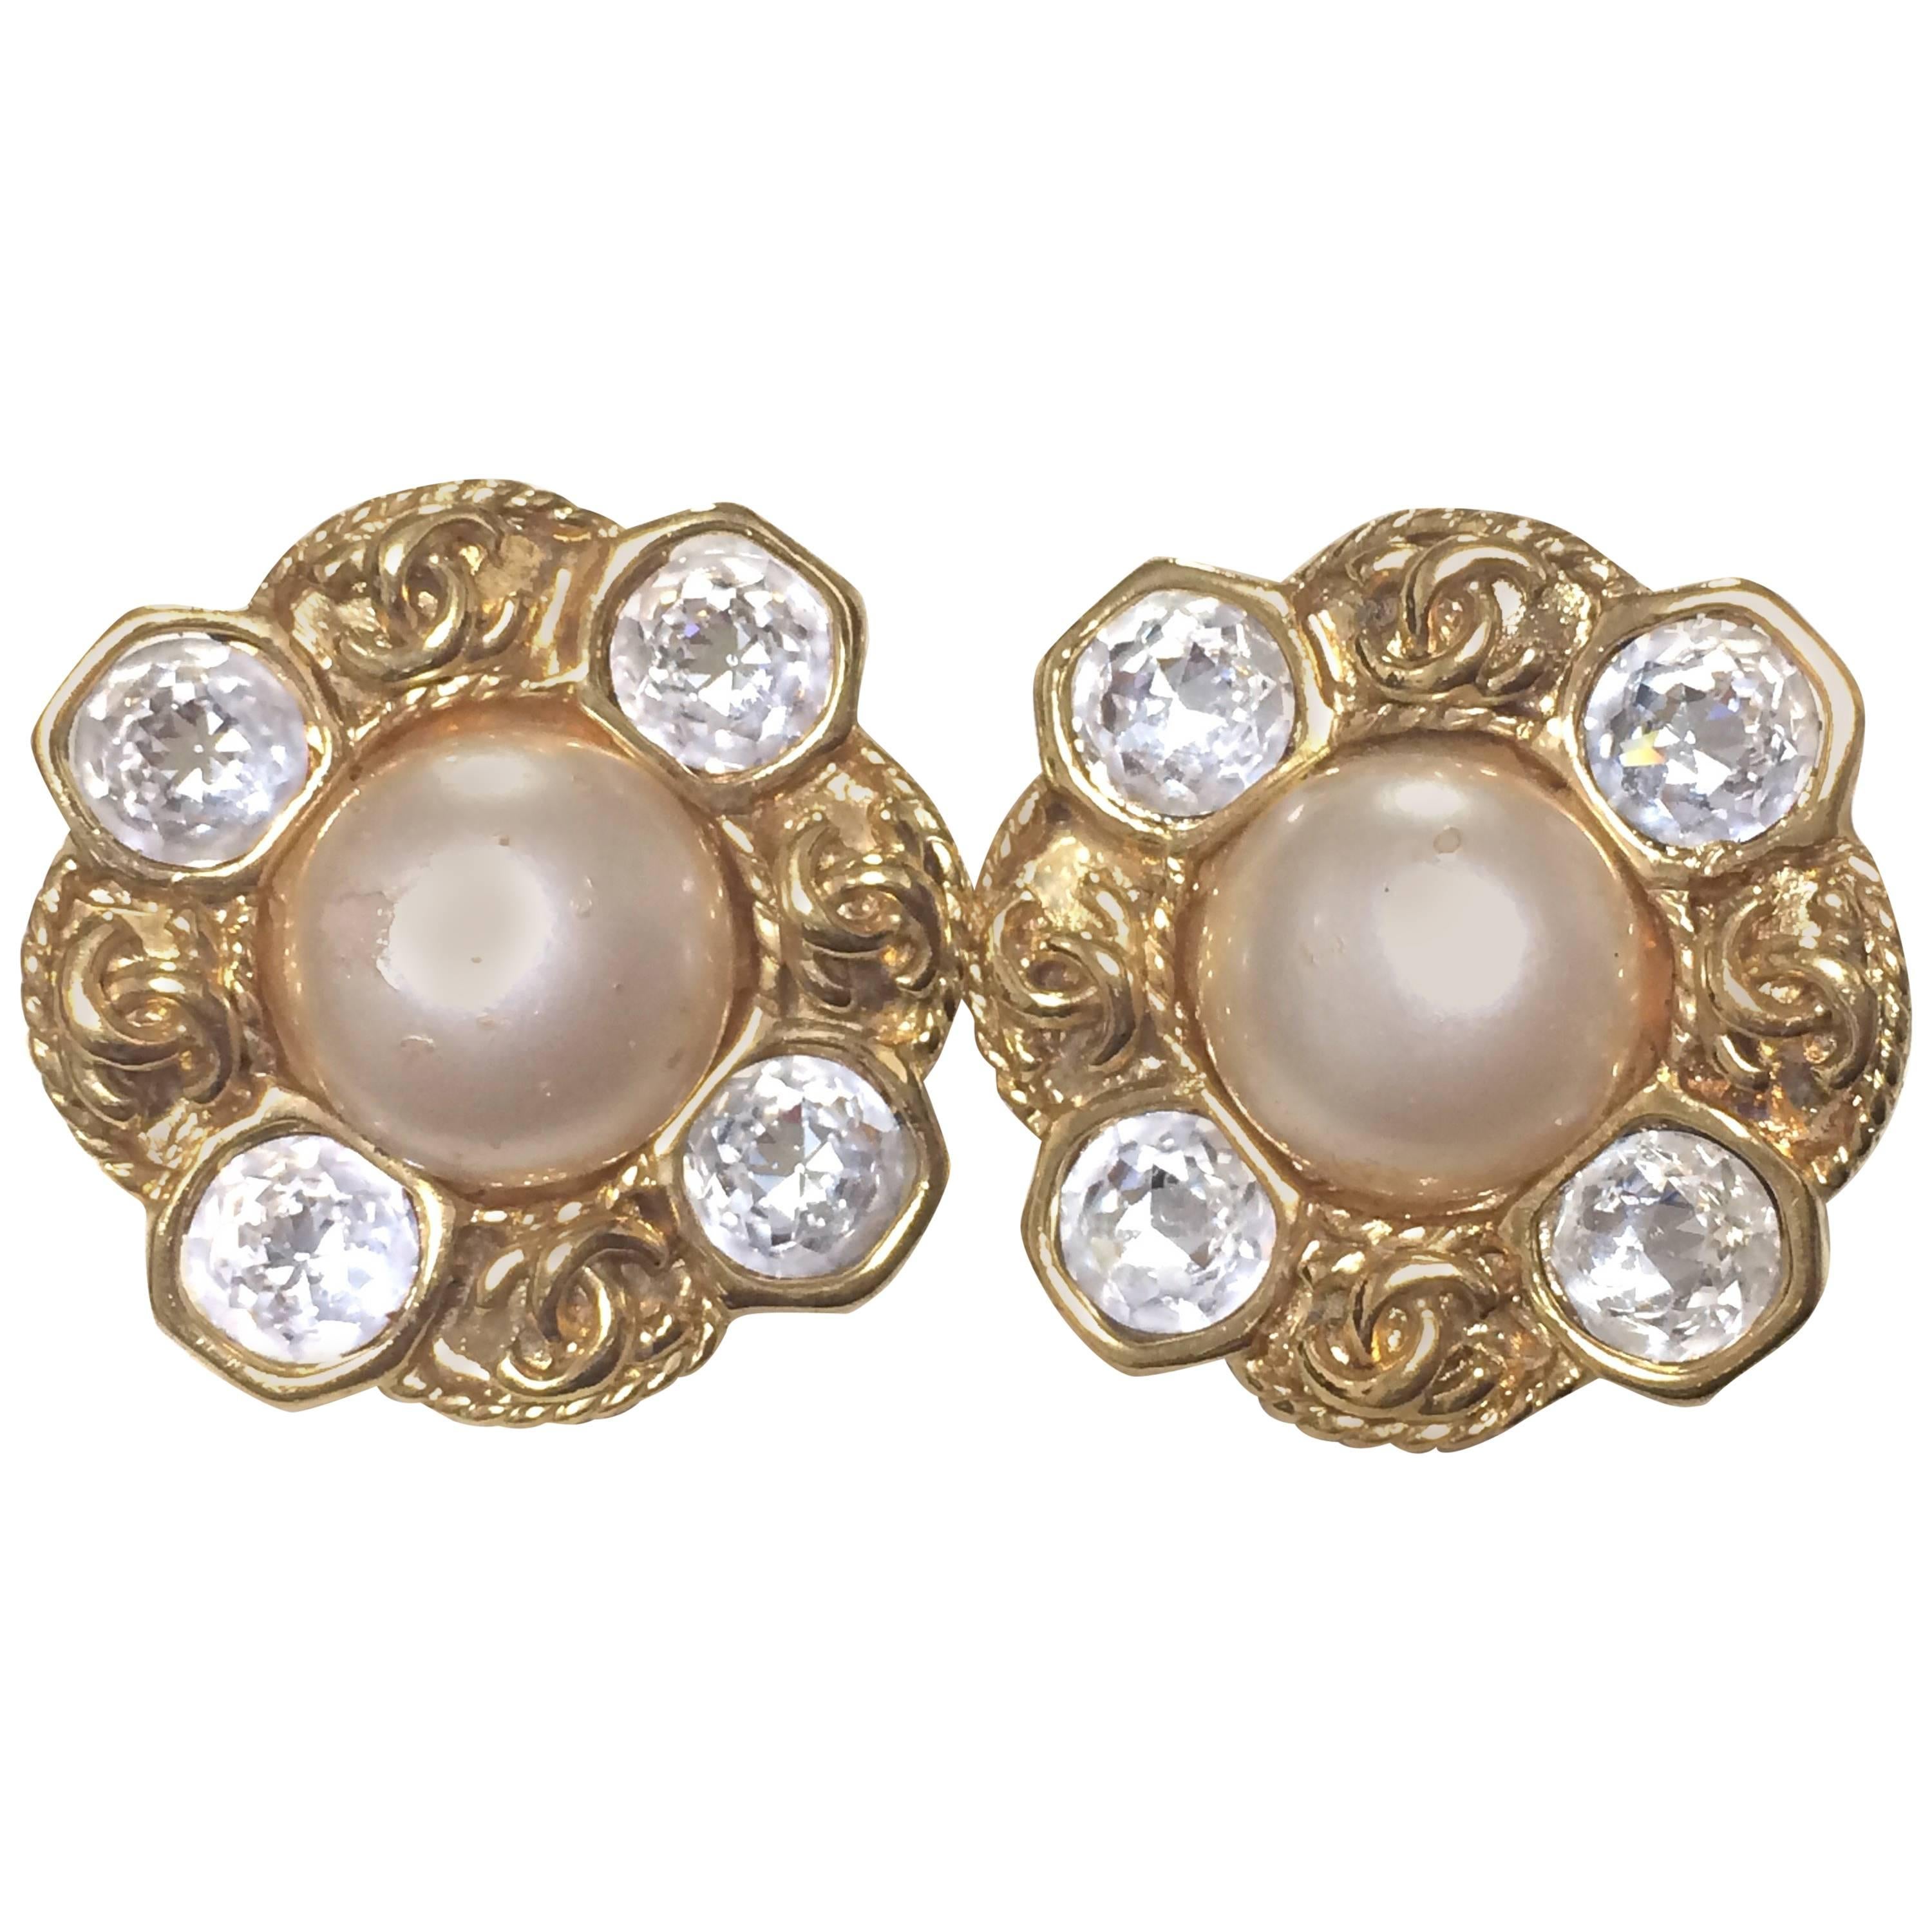 Vintage CHANEL gold tone earrings with a faux pearl, Swarovski crystal stones For Sale